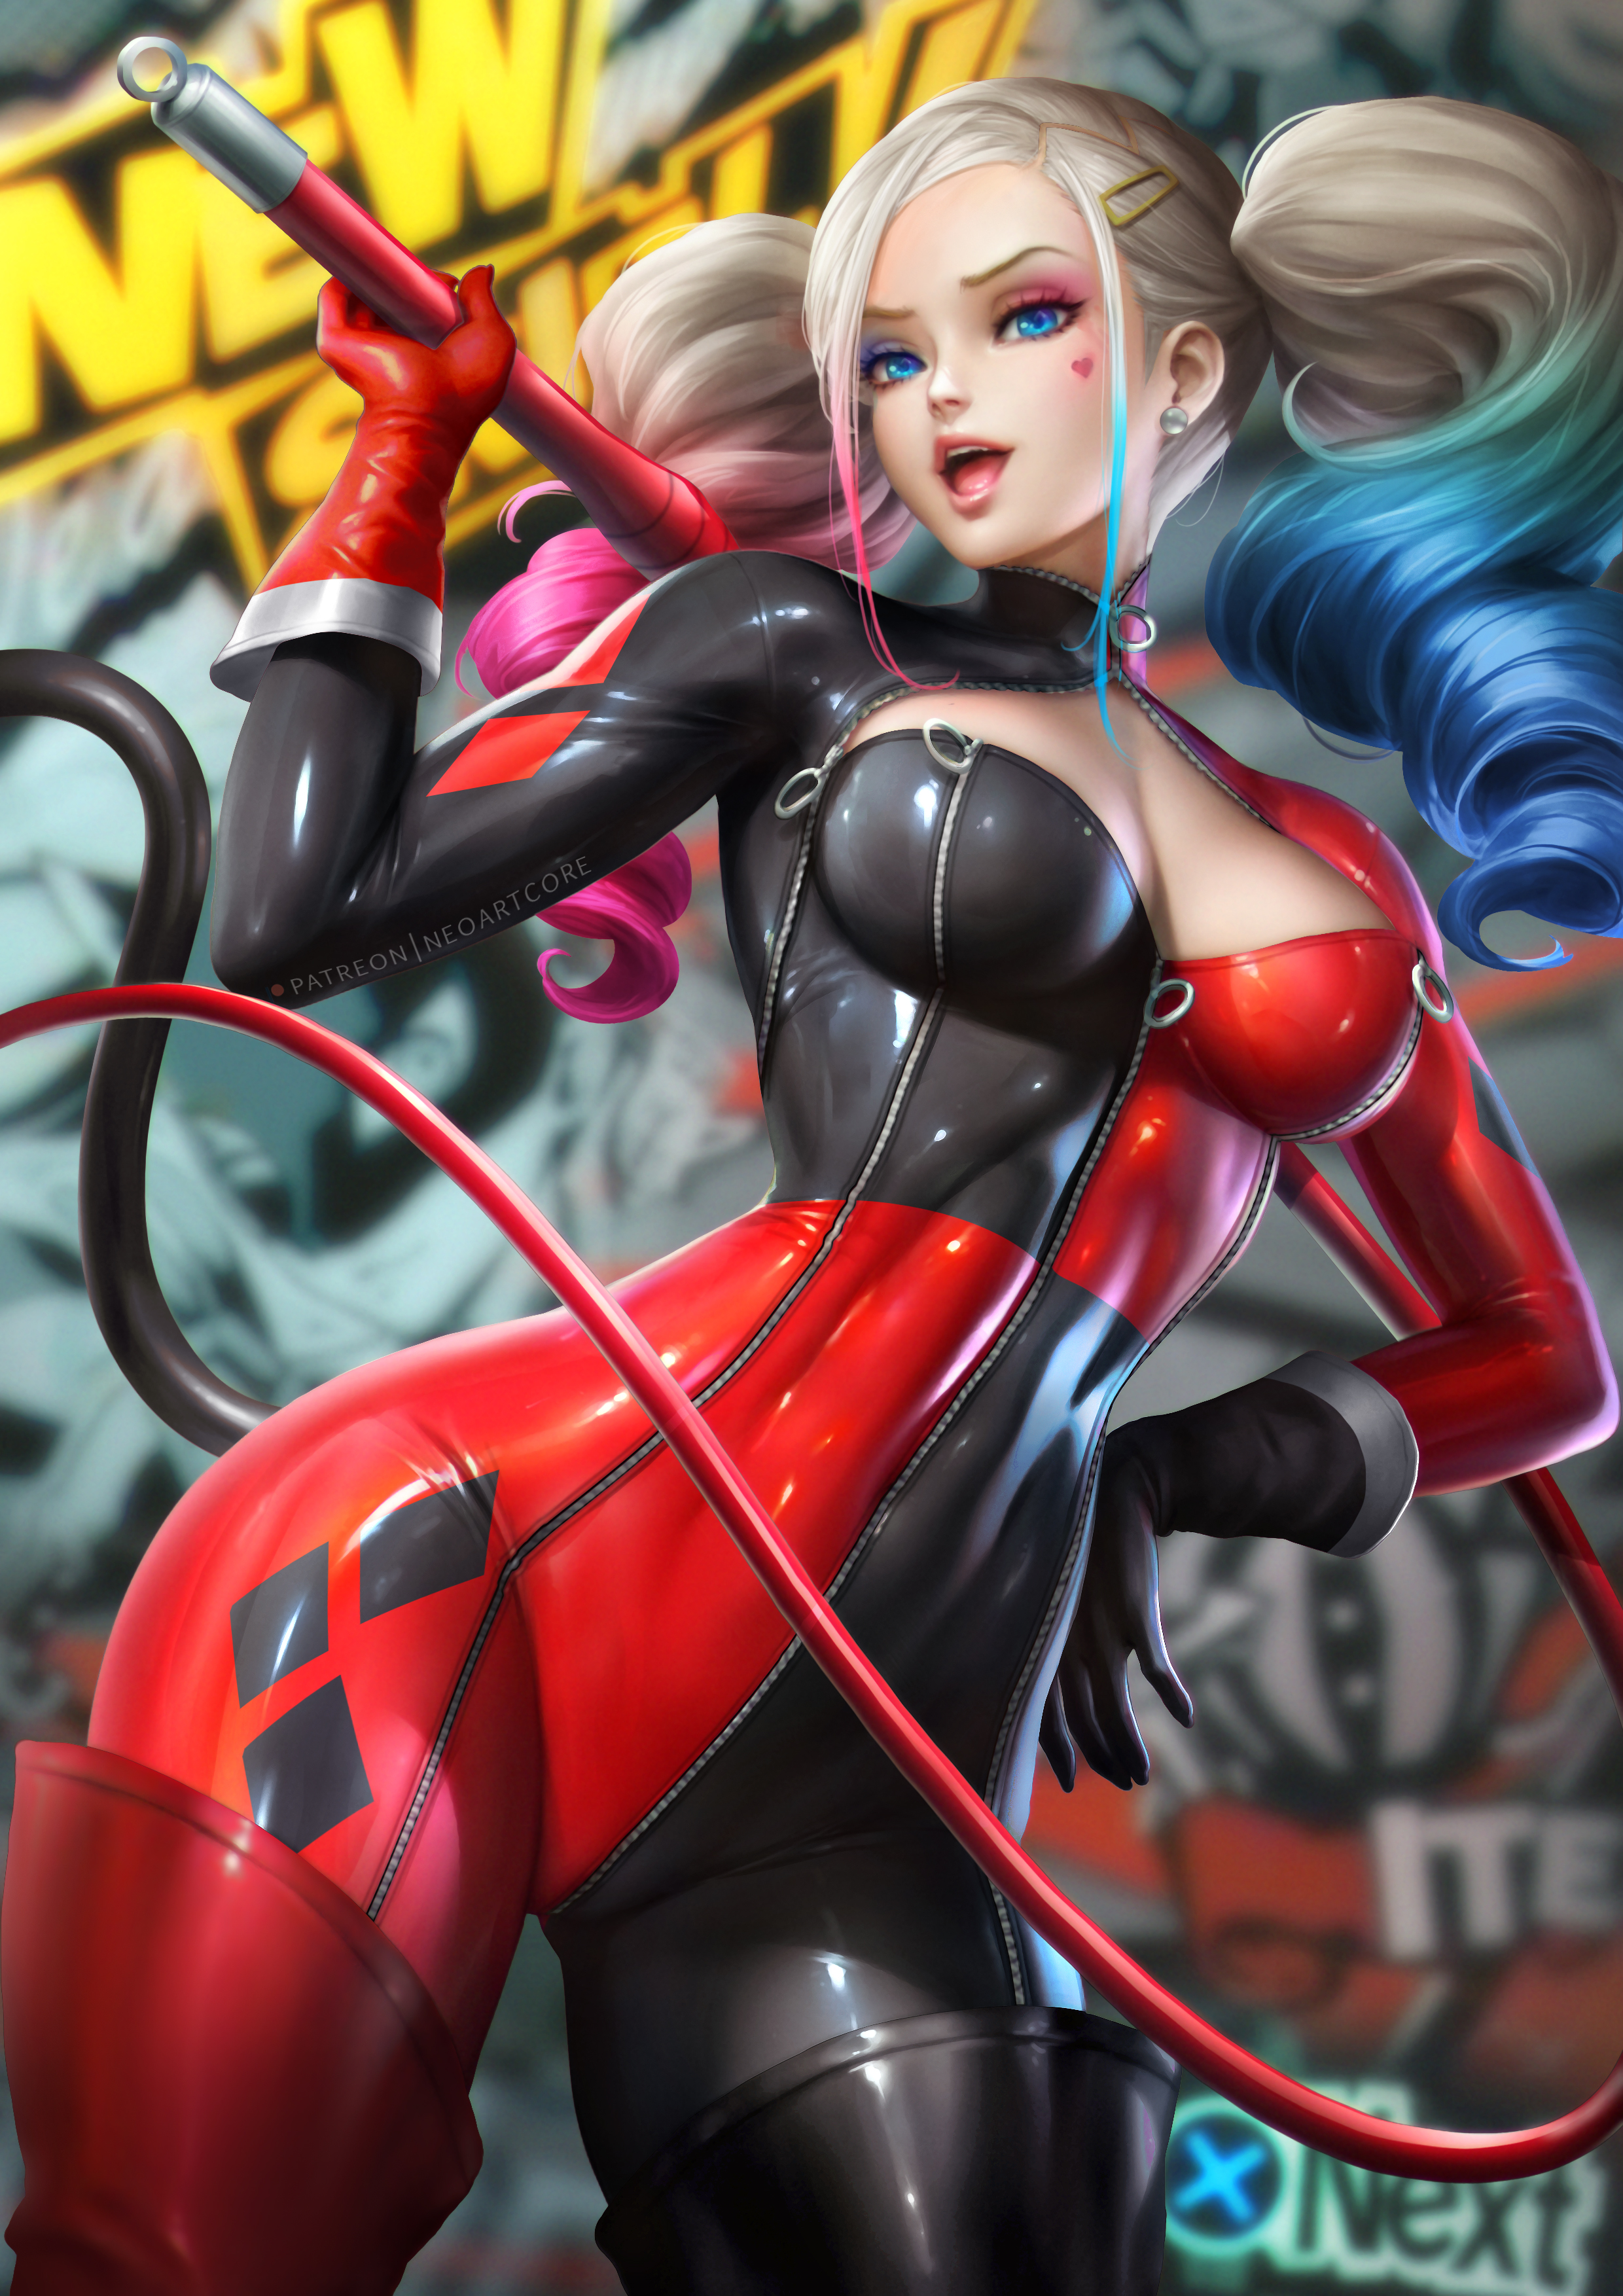 NeoArtCorE Artist Persona 5 Cosplay Harley Quinn Blonde Tight Clothing Wide Hips Whips Looking At Vi 2480x3508